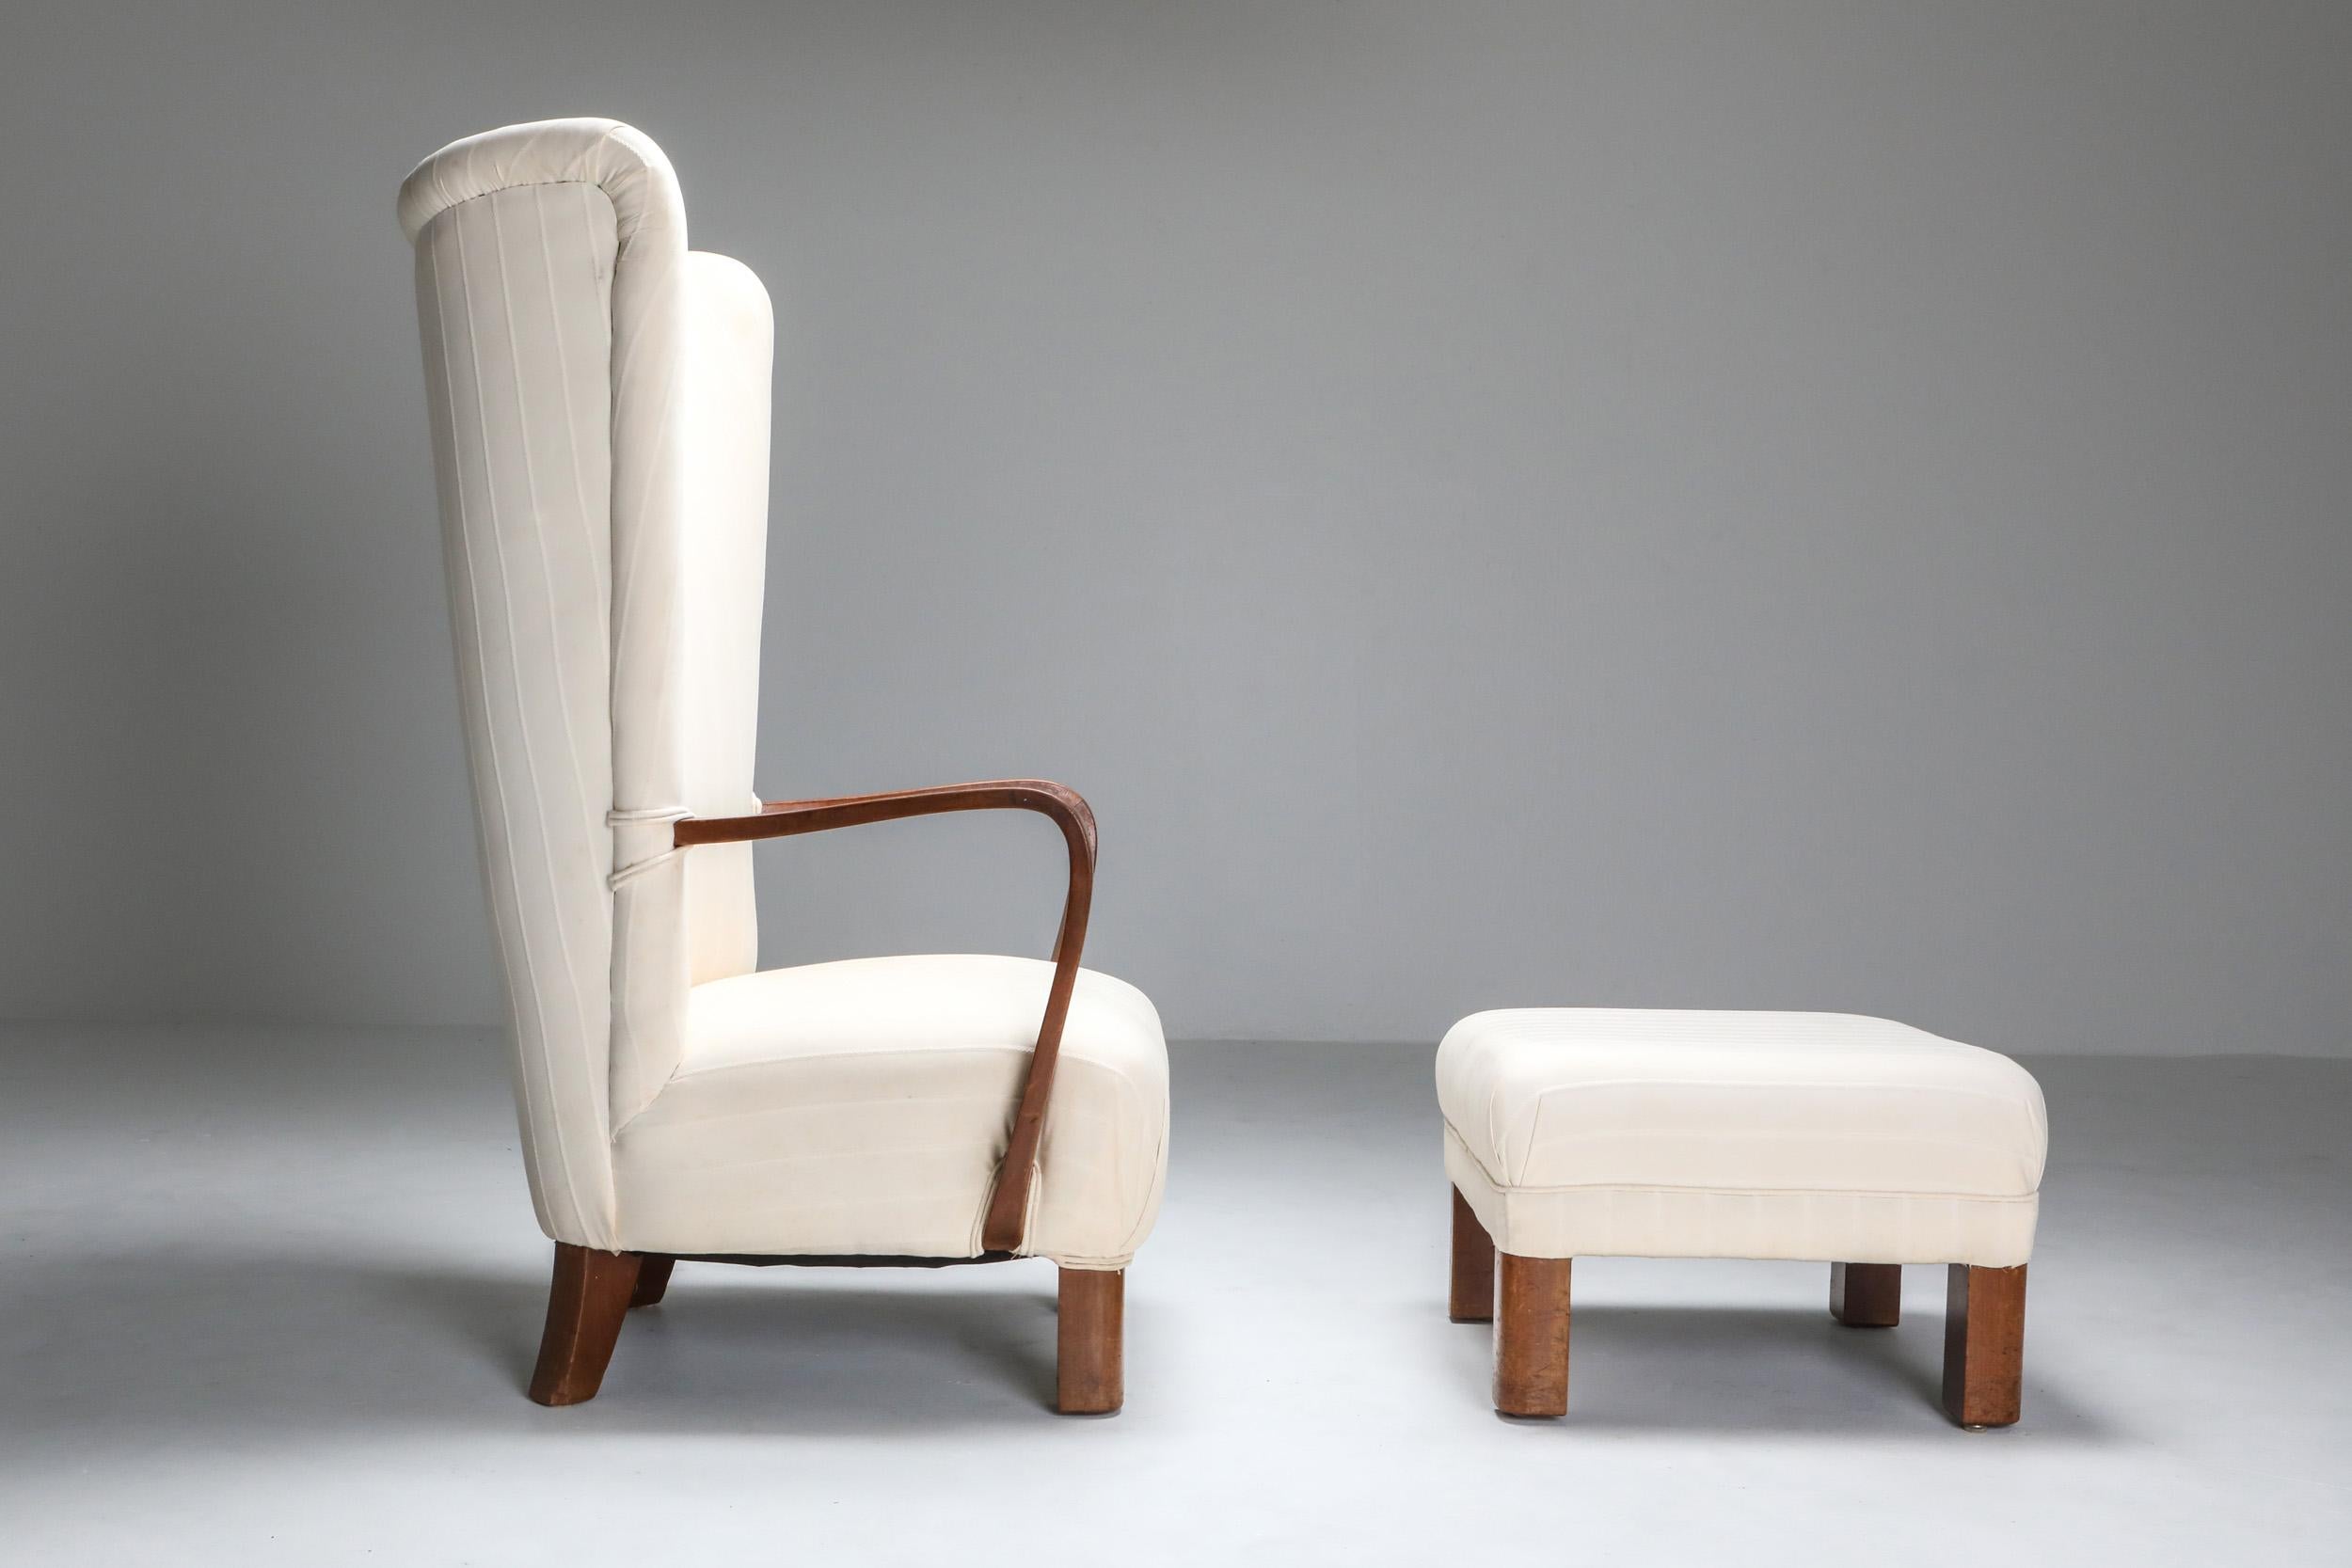 Mid-20th Century White Wingback Chair With Ottoman, Denmark, 1950s For Sale